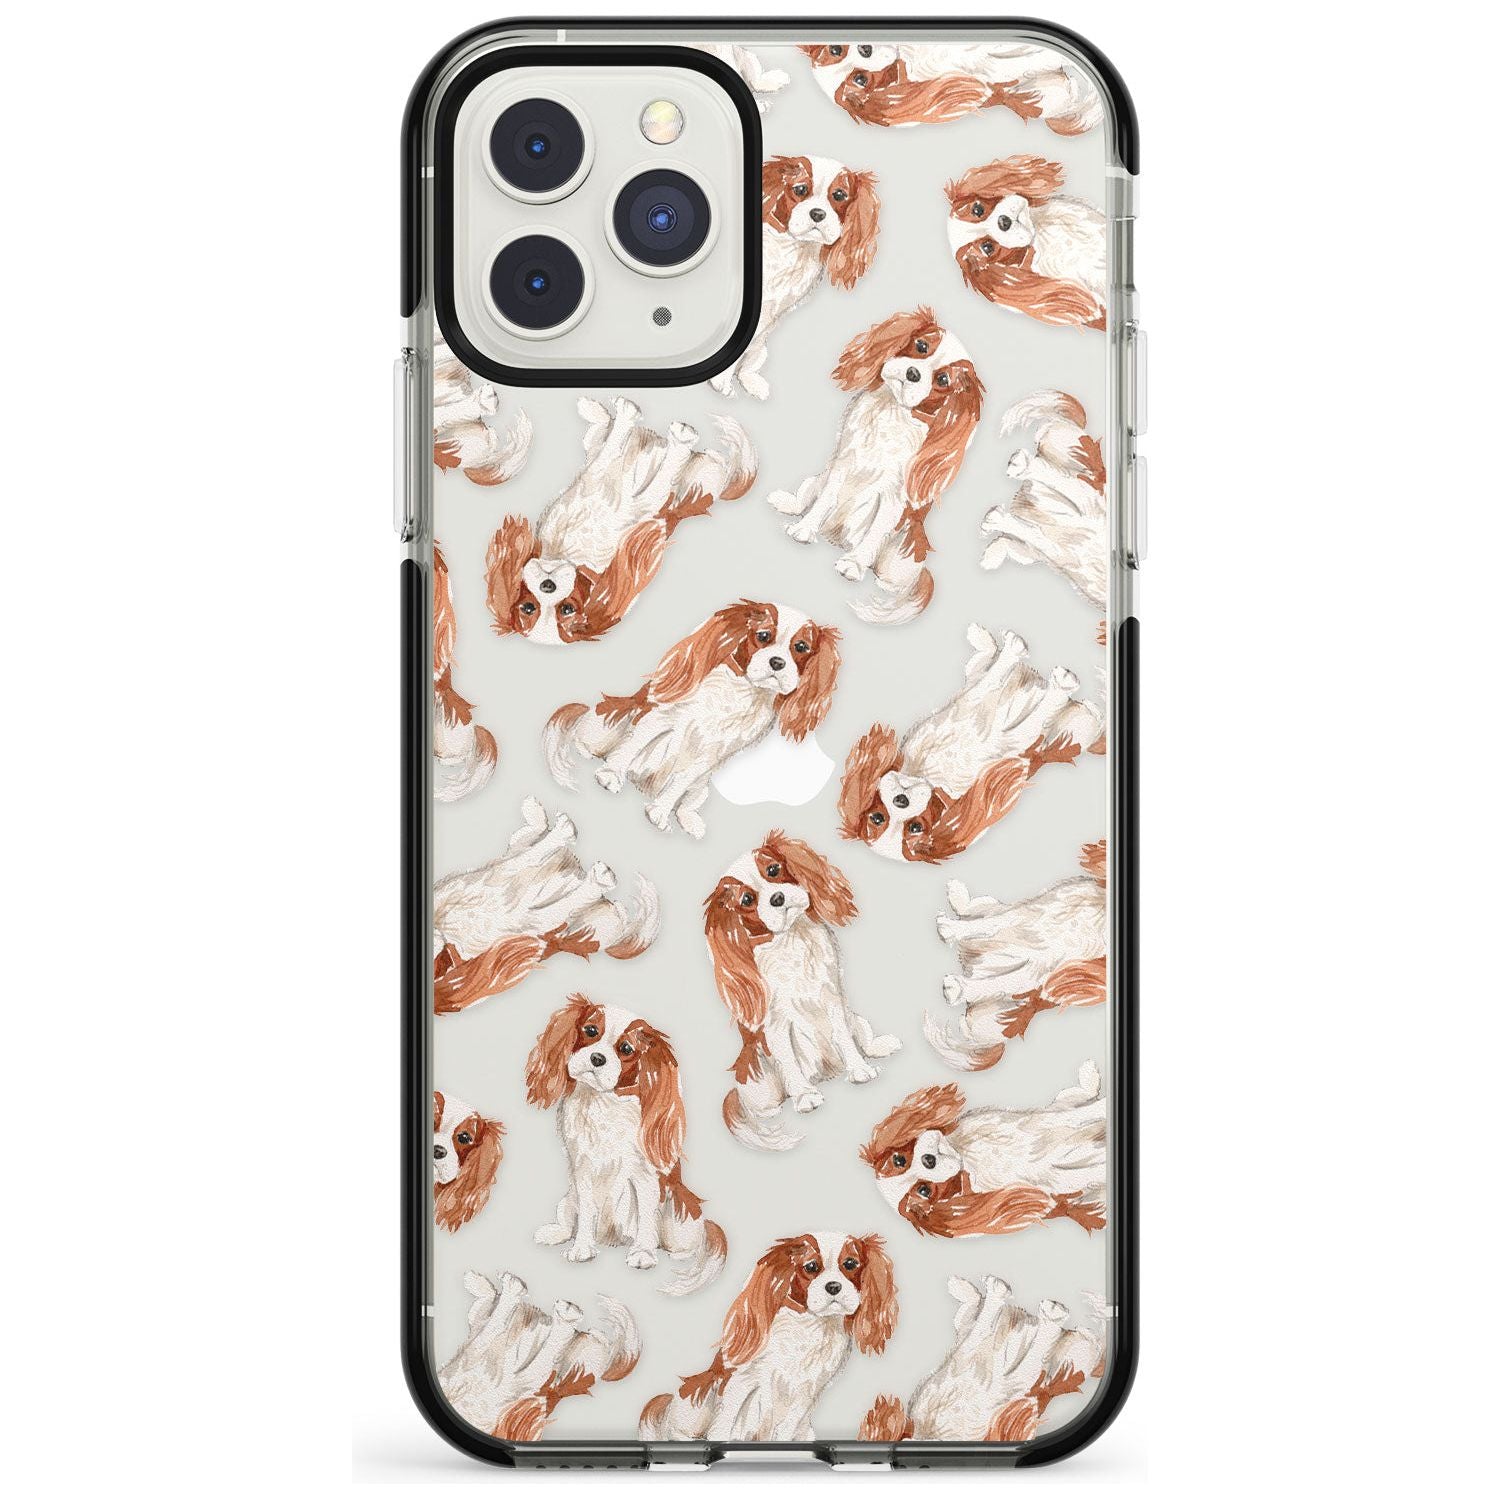 Cavalier King Charles Spaniel Dog Pattern Black Impact Phone Case for iPhone 11 Pro Max